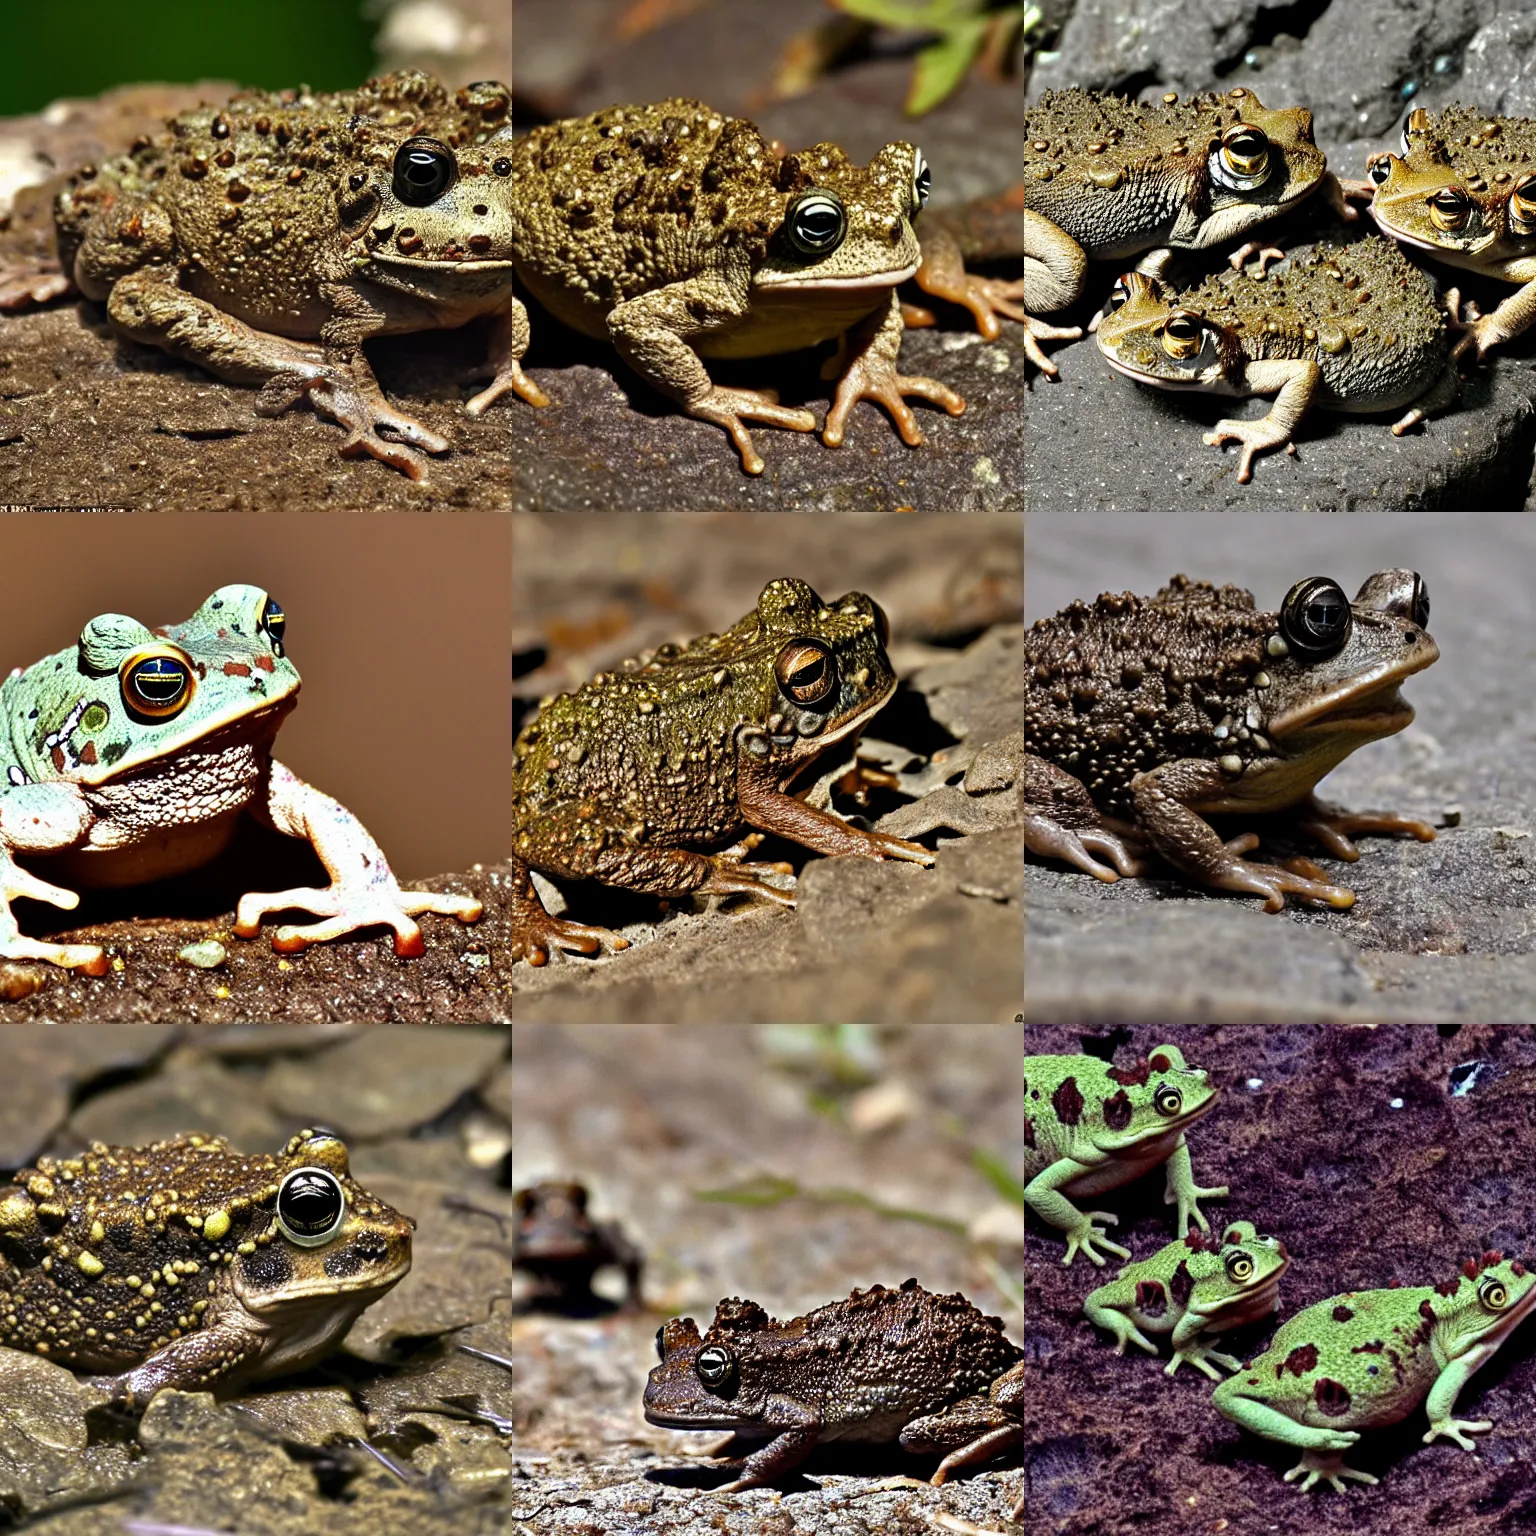 Prompt: Mare and corpse-eyed toads searched for cesium, found late morning whistling Hn